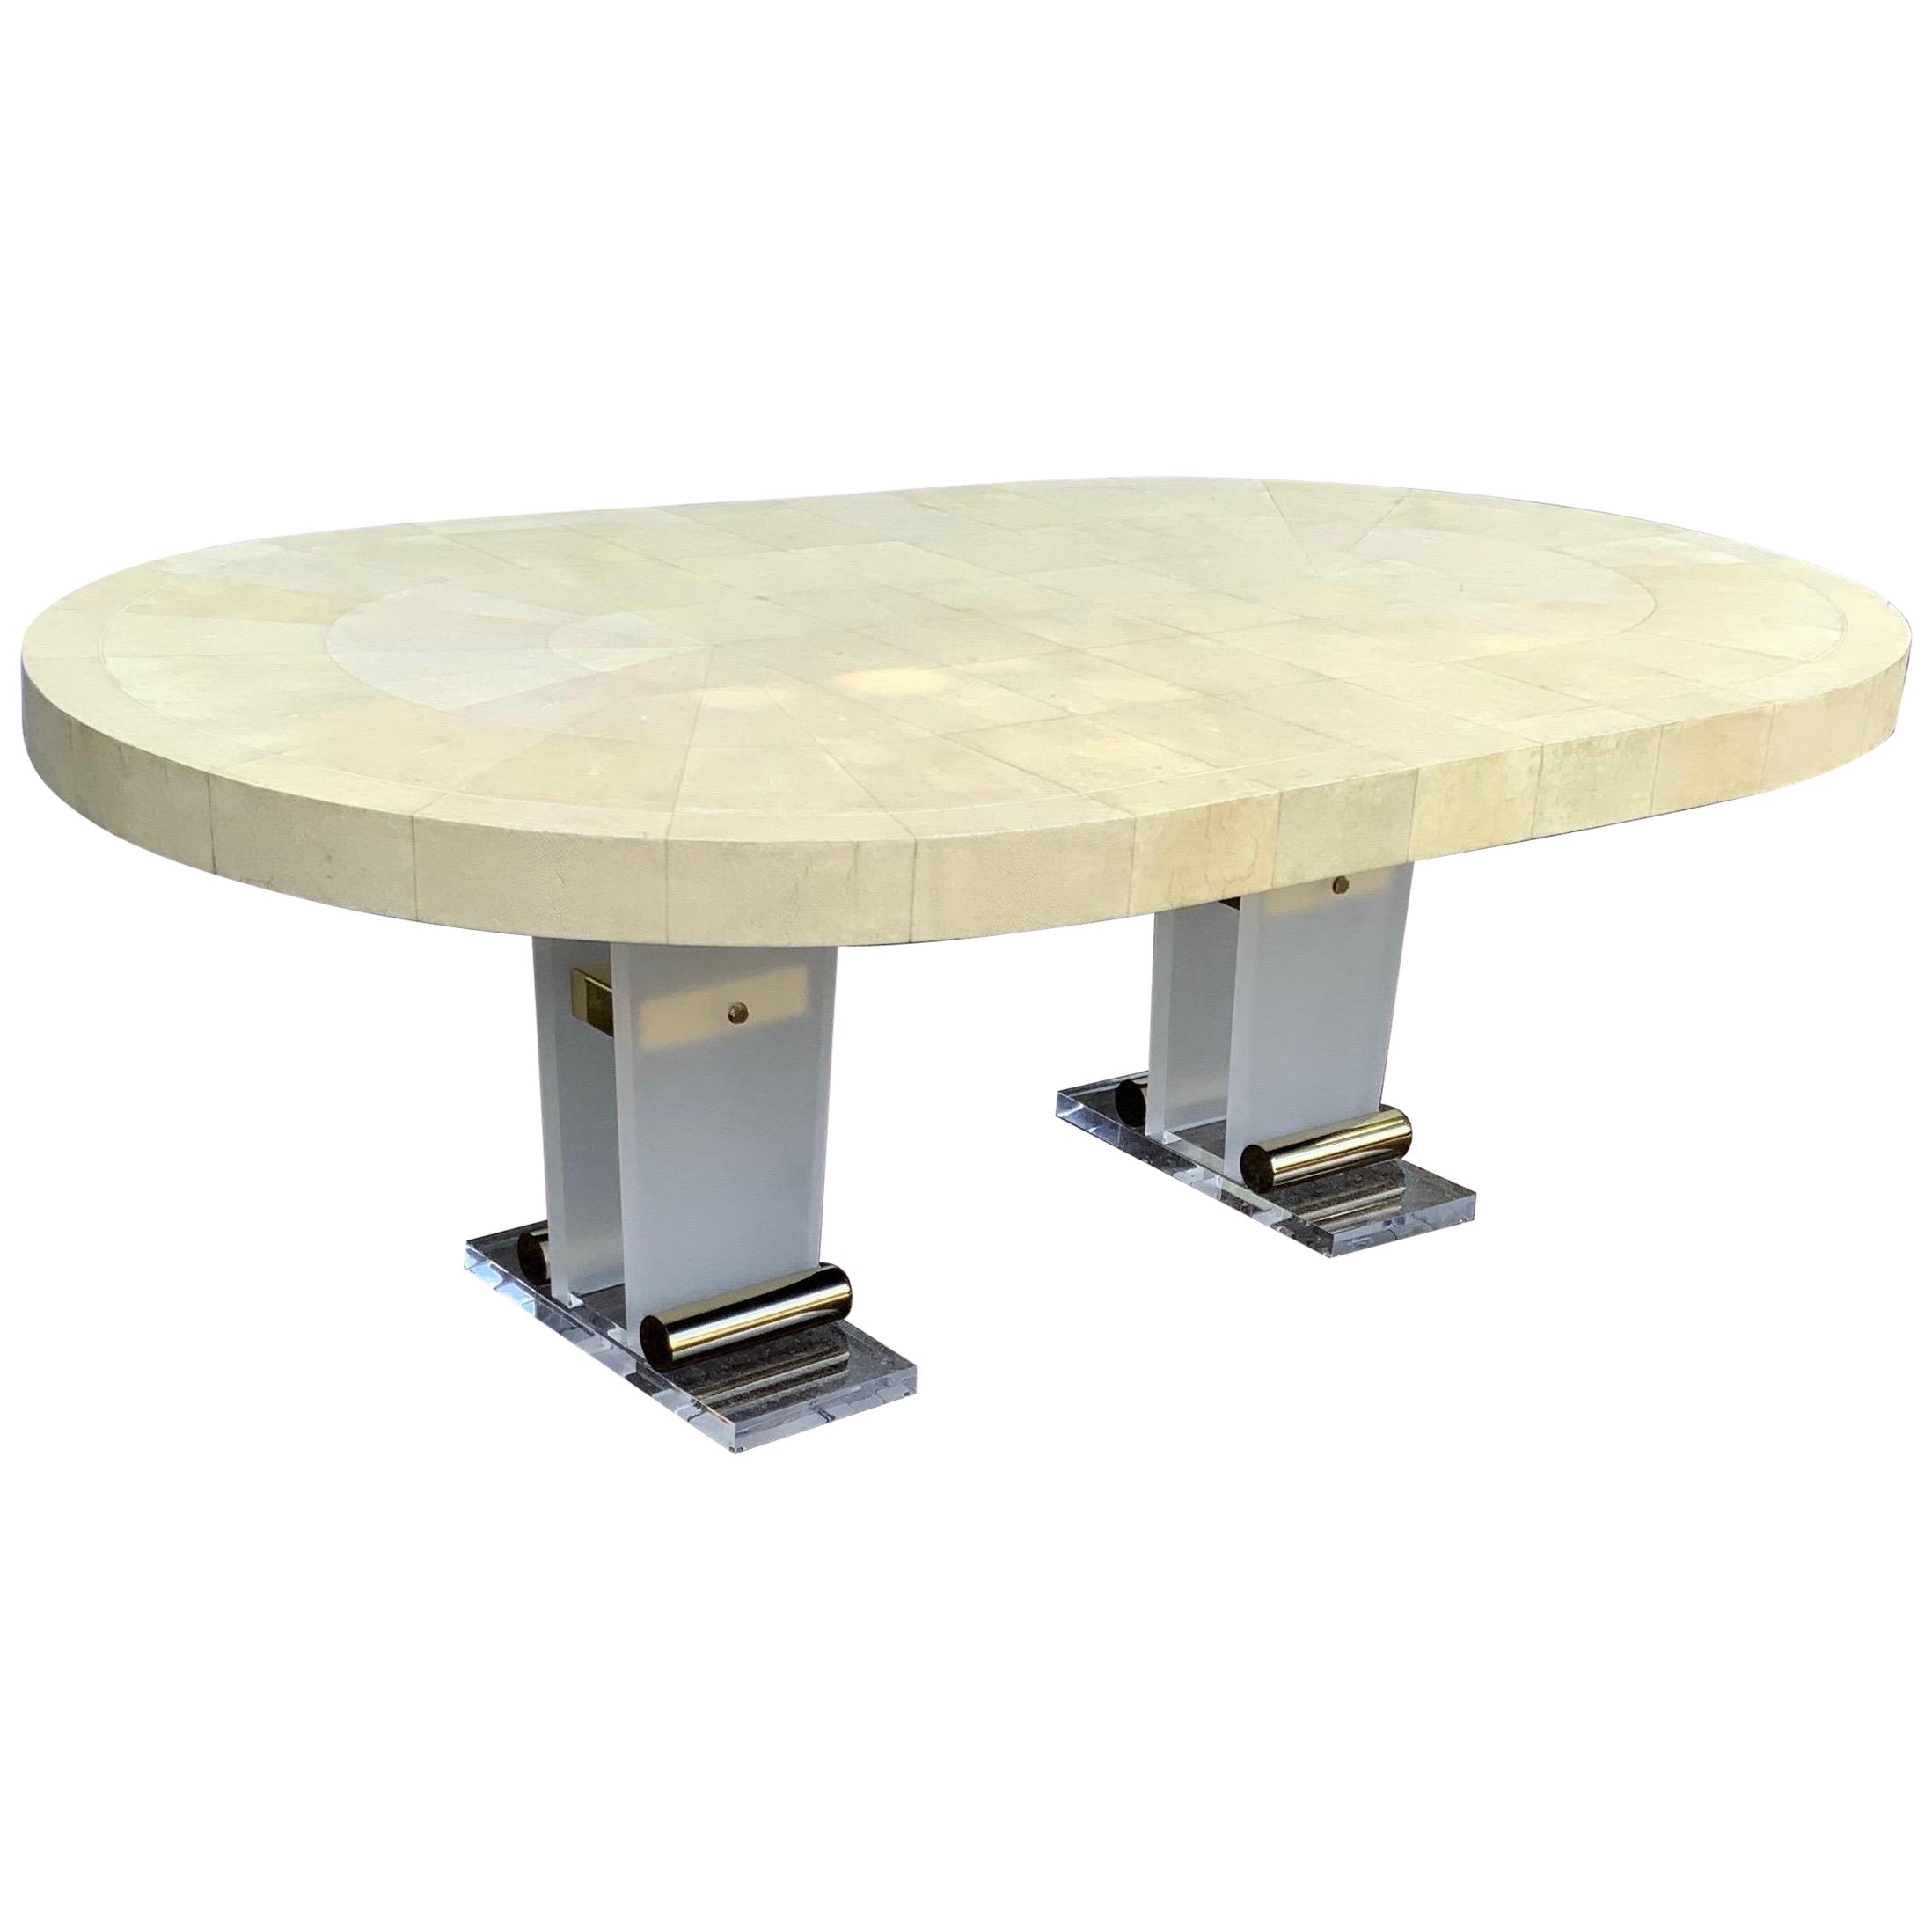 Ron Seff Shagreen and Lucite Dining Room Table For Sale